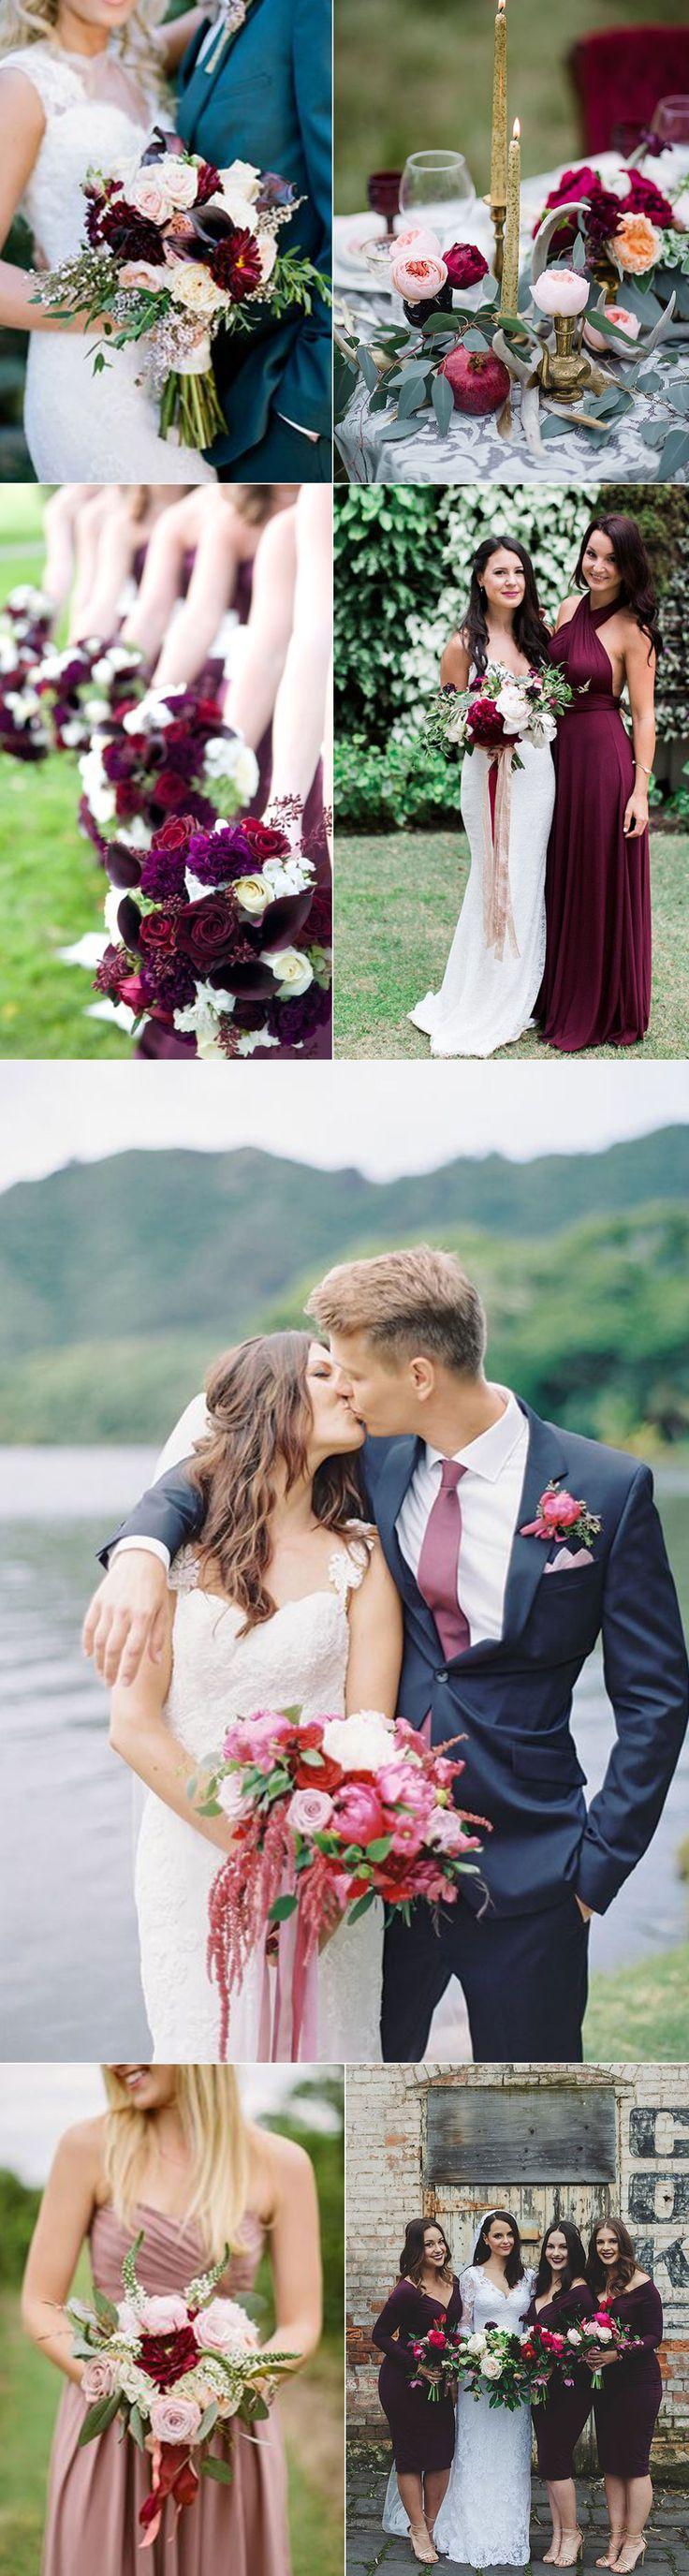 Hochzeit - Wedding Inspiration For Plums And Pinks   